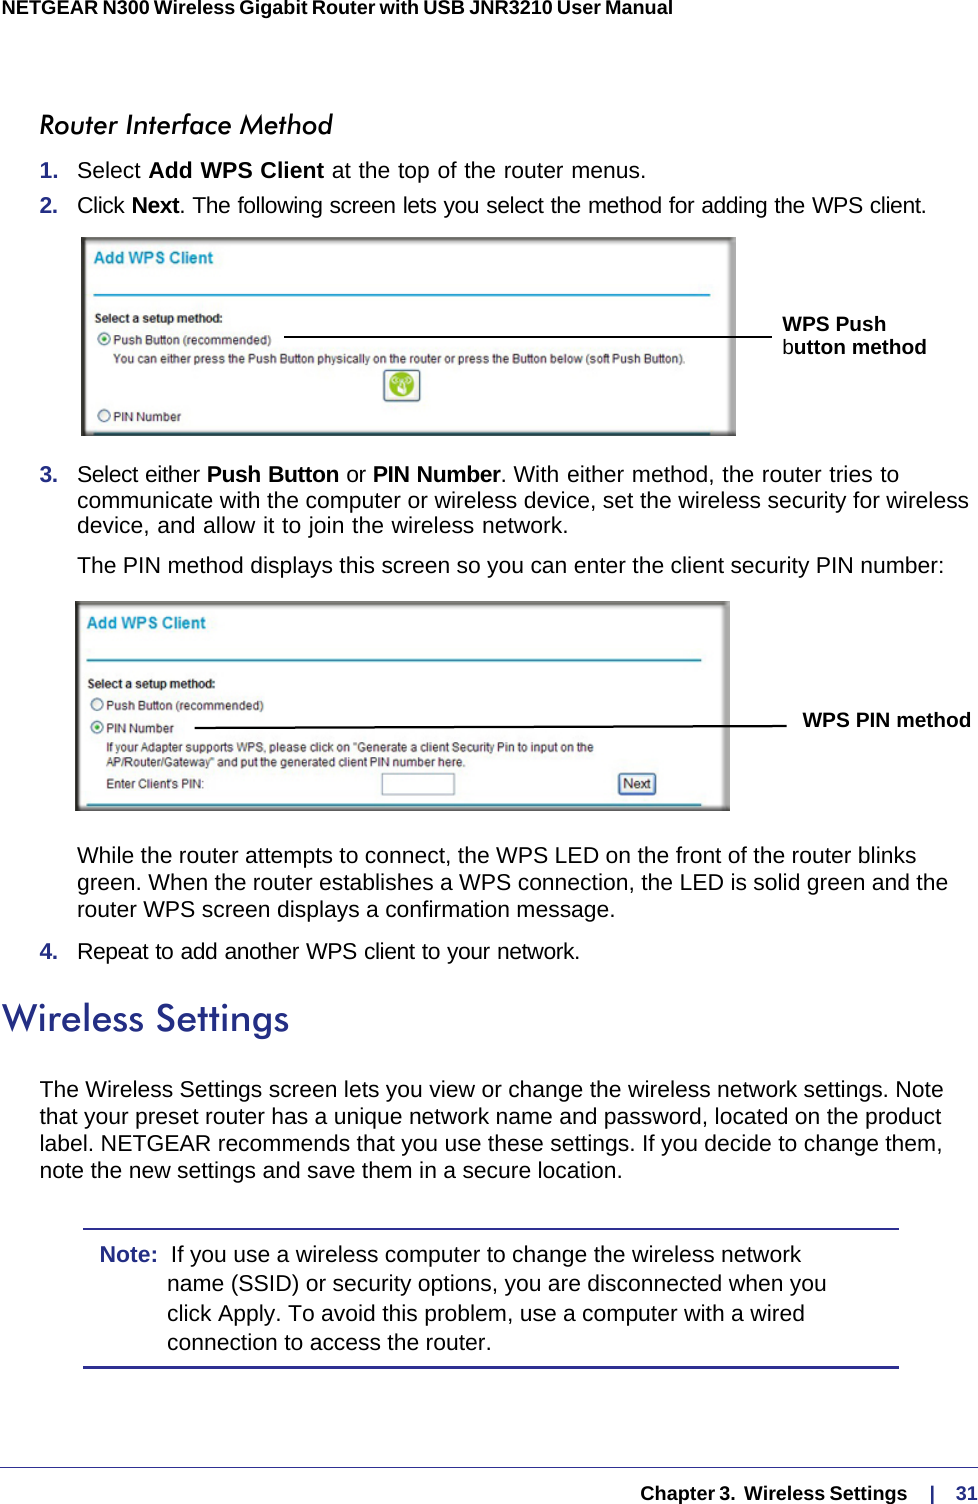   Chapter 3.  Wireless Settings     |    31NETGEAR N300 Wireless Gigabit Router with USB JNR3210 User Manual Router Interface Method1.  Select Add WPS Client at the top of the router menus. 2.  Click Next. The following screen lets you select the method for adding the WPS client.WPS Pushbutton method3.  Select either Push Button or PIN Number. With either method, the router tries to communicate with the computer or wireless device, set the wireless security for wireless device, and allow it to join the wireless network.The PIN method displays this screen so you can enter the client security PIN number:WPS PIN methodWhile the router attempts to connect, the WPS LED on the front of the router blinks green. When the router establishes a WPS connection, the LED is solid green and the router WPS screen displays a confirmation message. 4.  Repeat to add another WPS client to your network.Wireless SettingsThe Wireless Settings screen lets you view or change the wireless network settings. Note that your preset router has a unique network name and password, located on the product label. NETGEAR recommends that you use these settings. If you decide to change them, note the new settings and save them in a secure location.Note:  If you use a wireless computer to change the wireless network name (SSID) or security options, you are disconnected when you click Apply. To avoid this problem, use a computer with a wired connection to access the router.